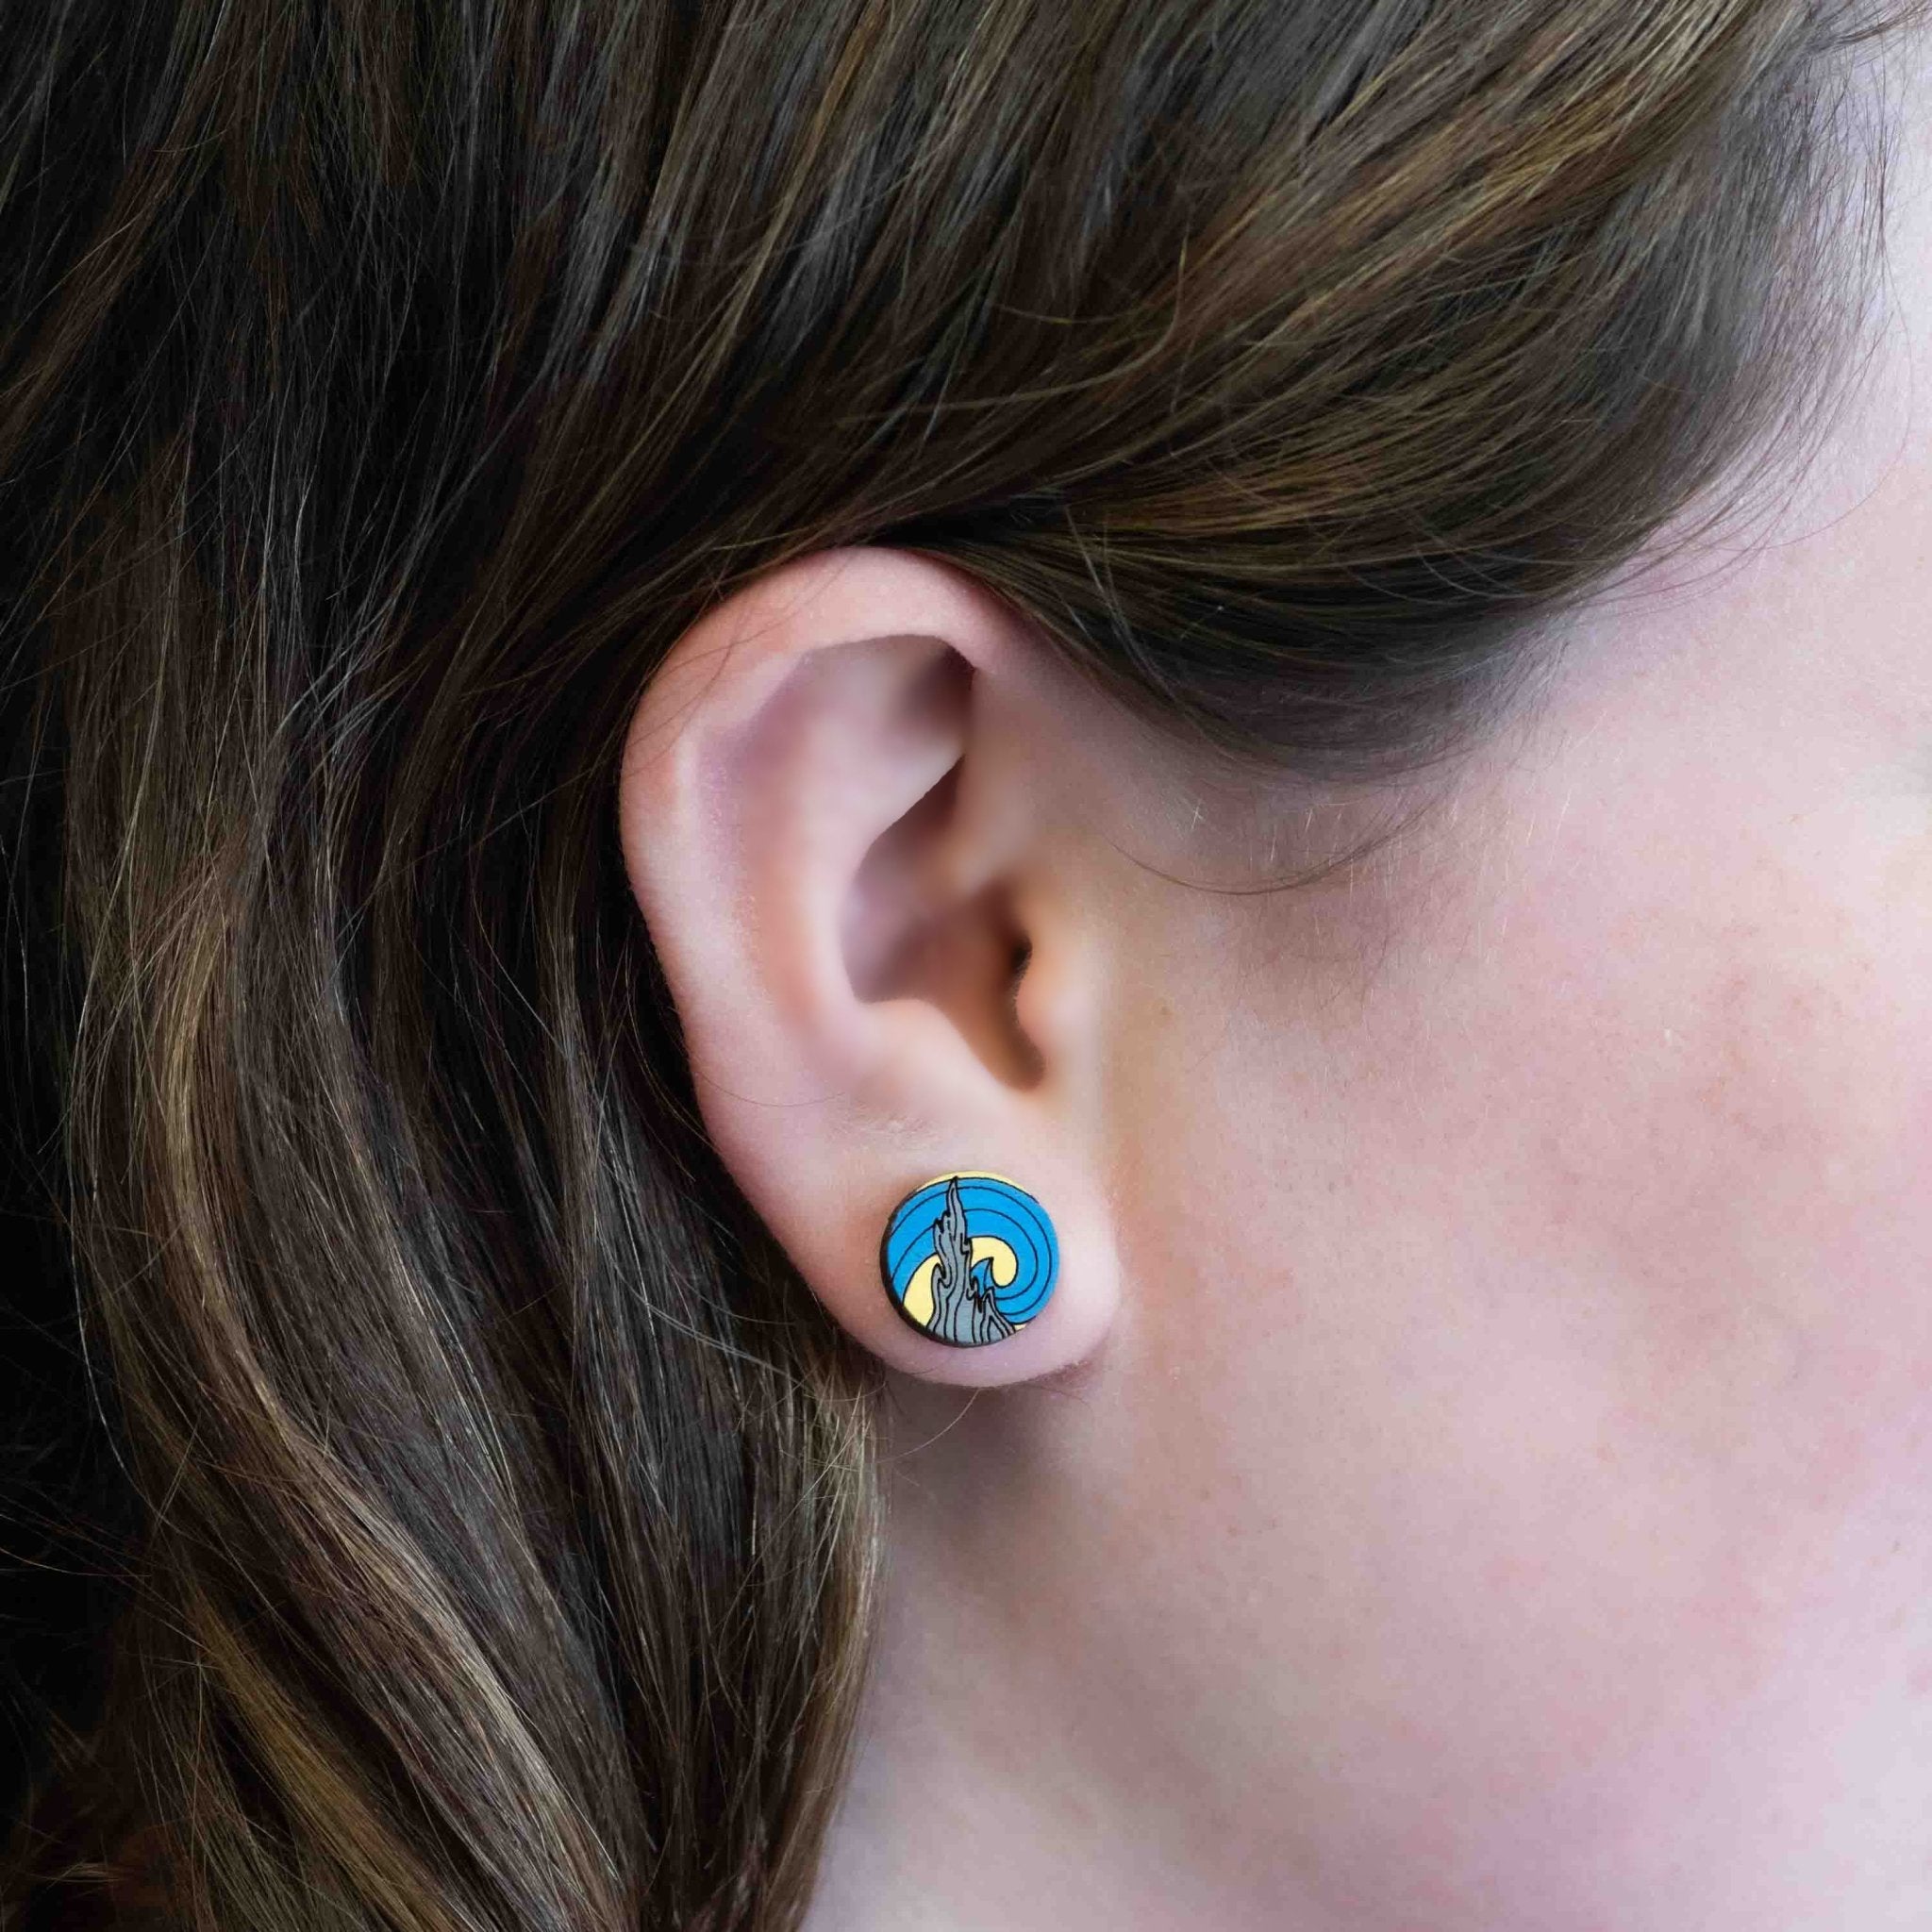 Hand-painted The Starry Night Earrings Inspired by Vincent van Gogh - PET15127 - Robin Valley Official Store